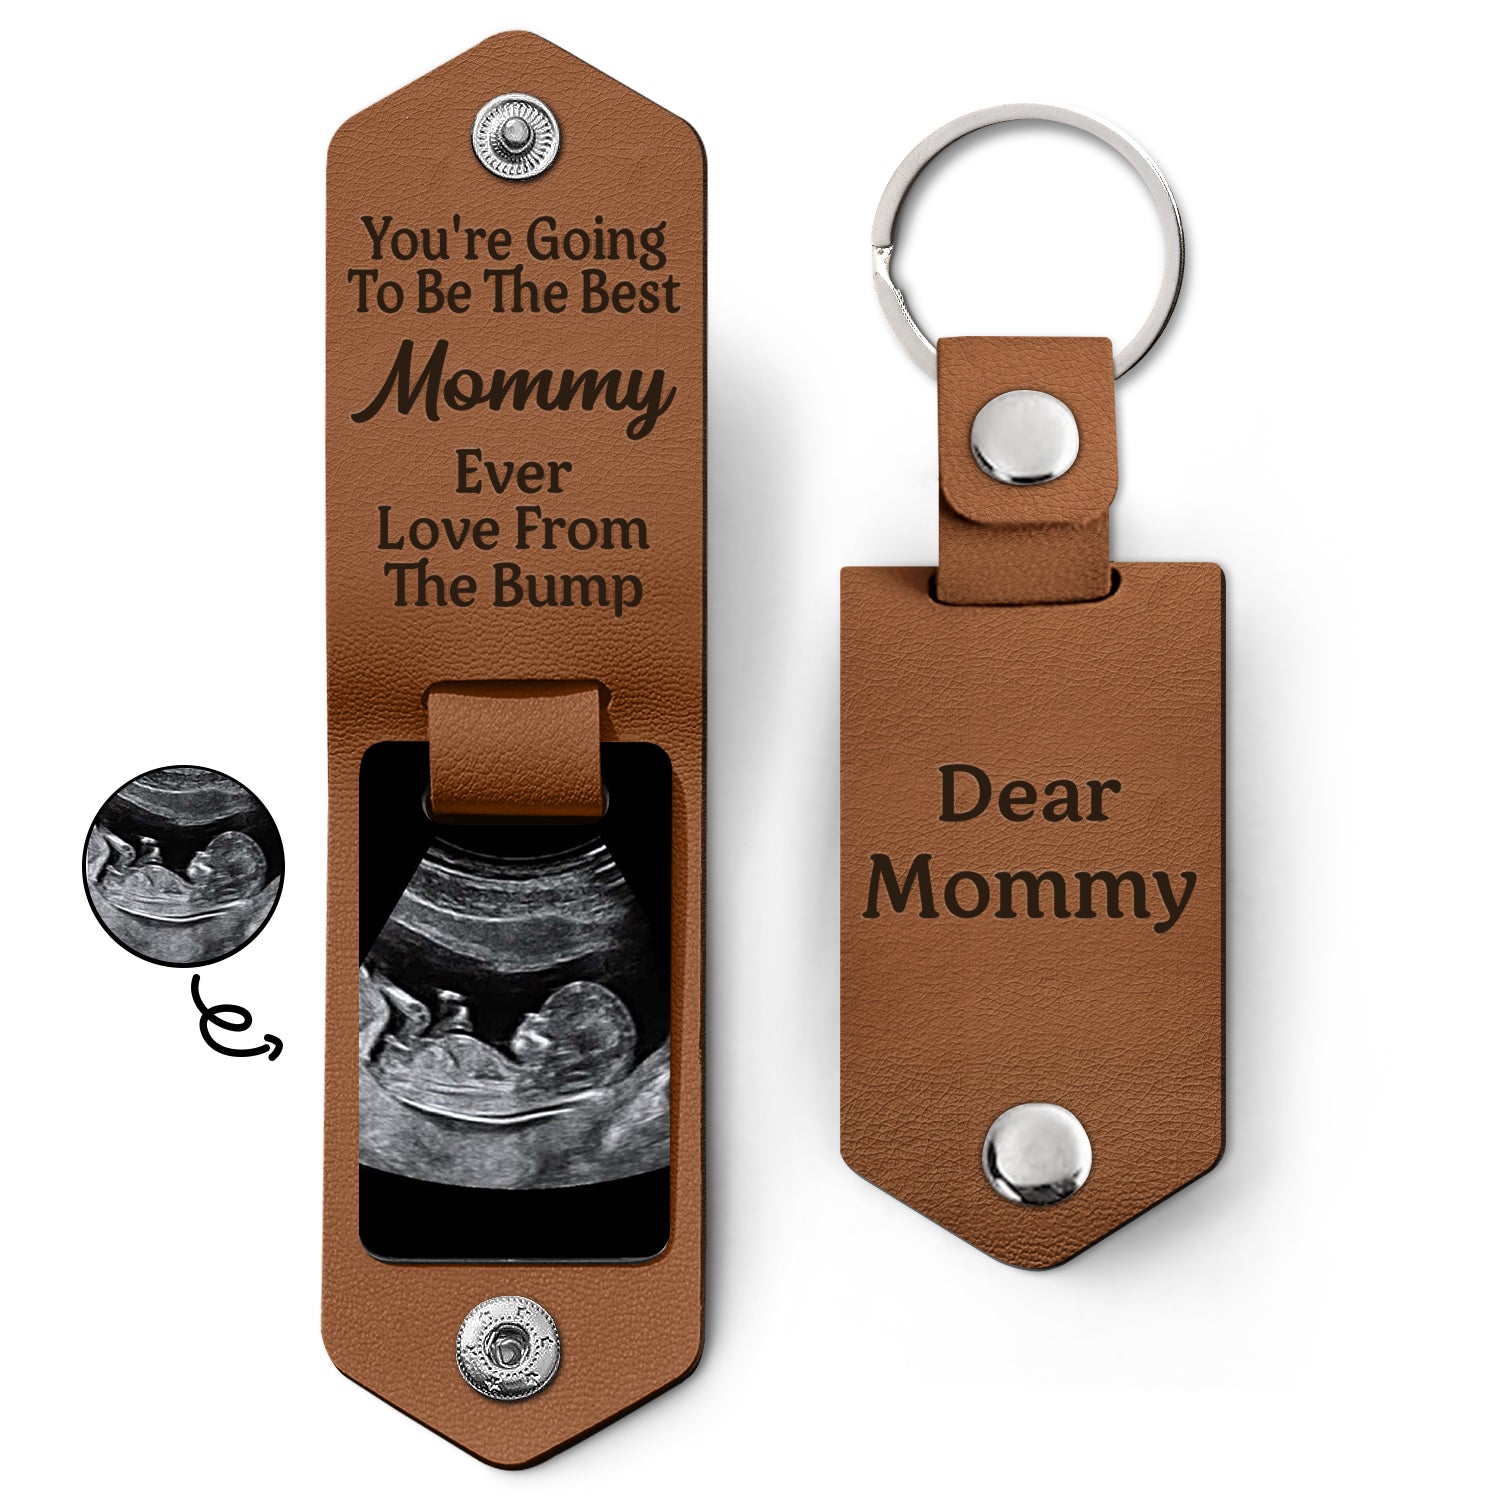 Custom Photo Going To Be The Best - Gift For Mom, Dad, New Parents - Personalized Leather Photo Keychain